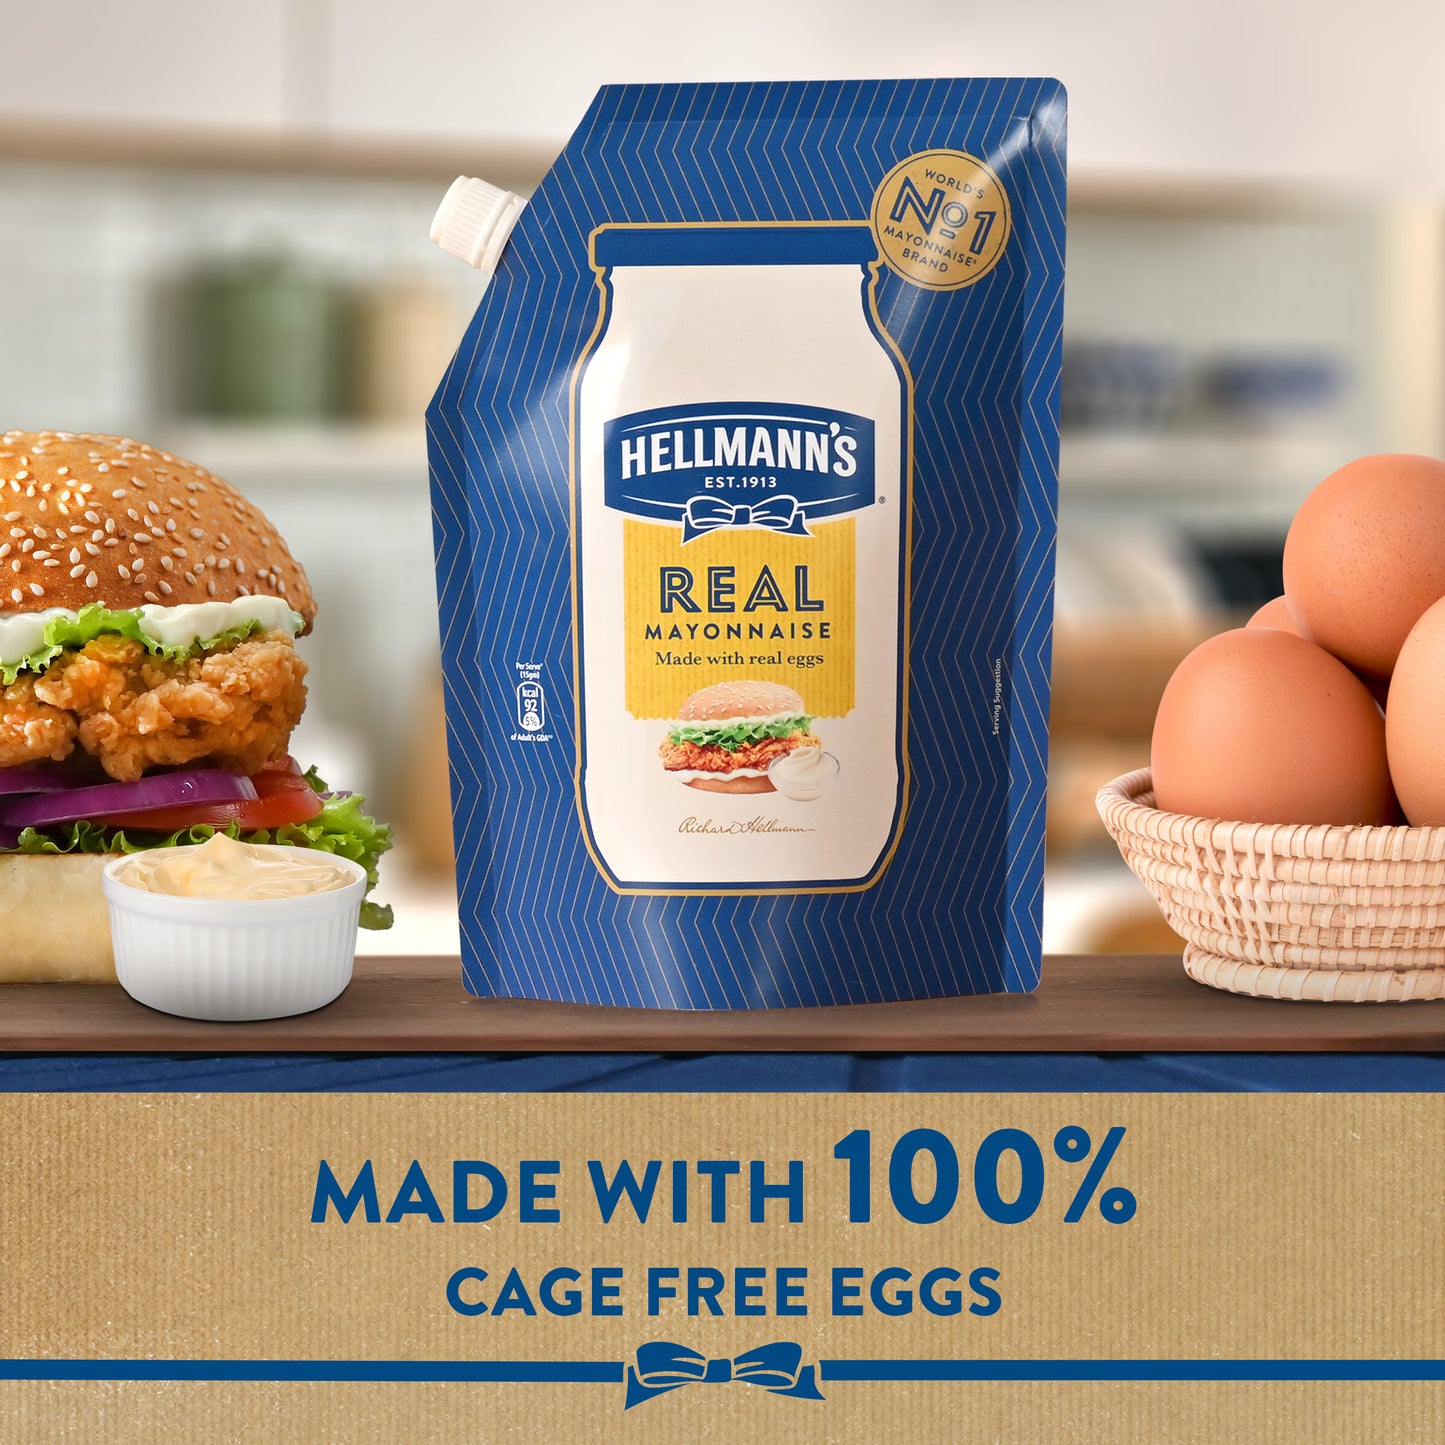 HELLMANNS REAL MAYONNAISE POUCH 450